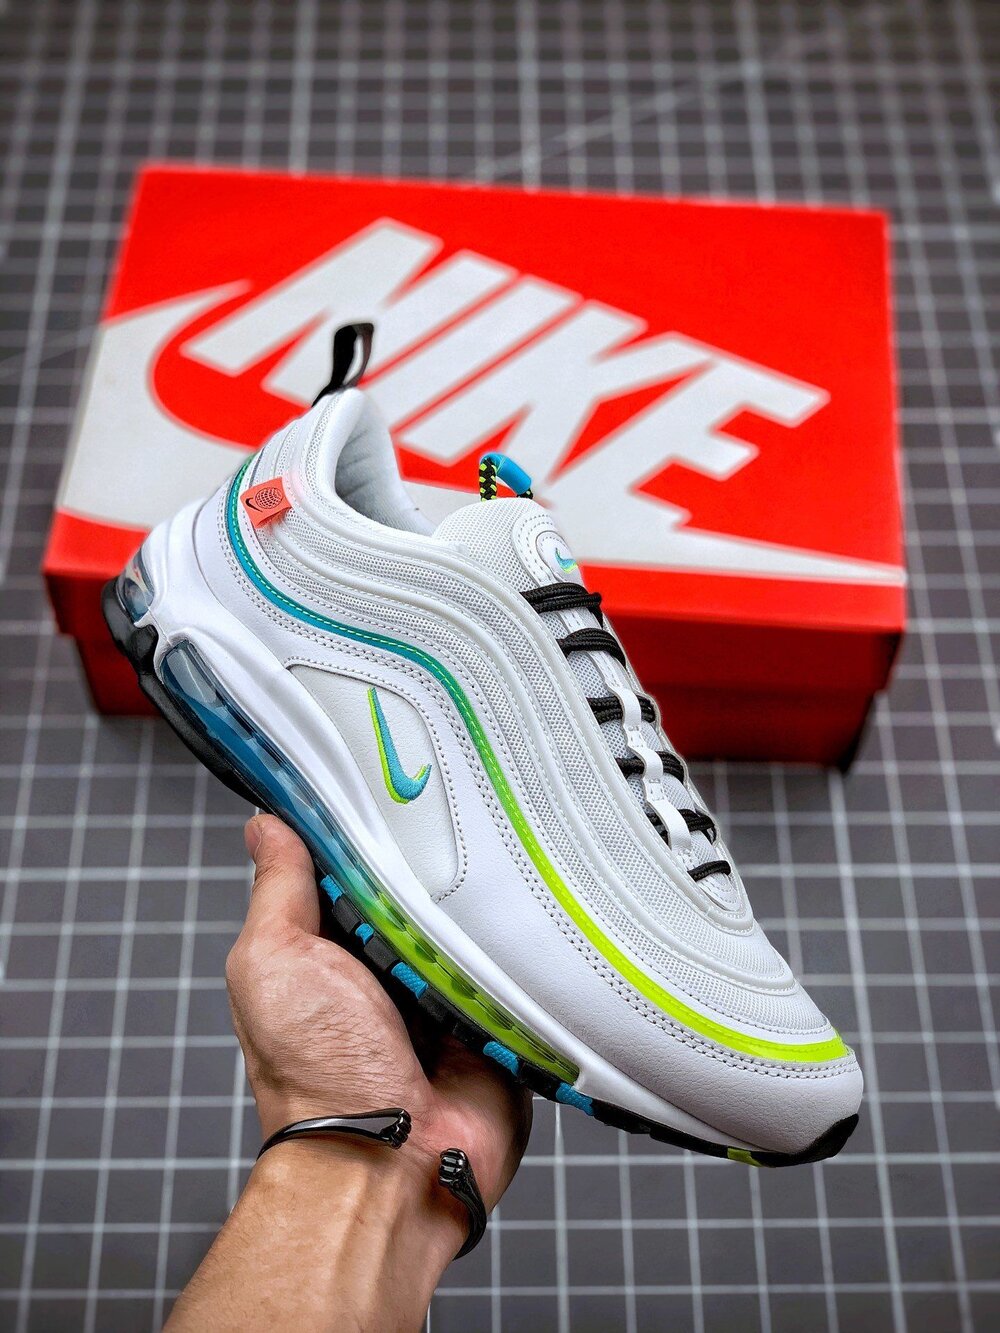 The Nike Air Max 97 “Worldwide” in white Is On Sale For $129 ...